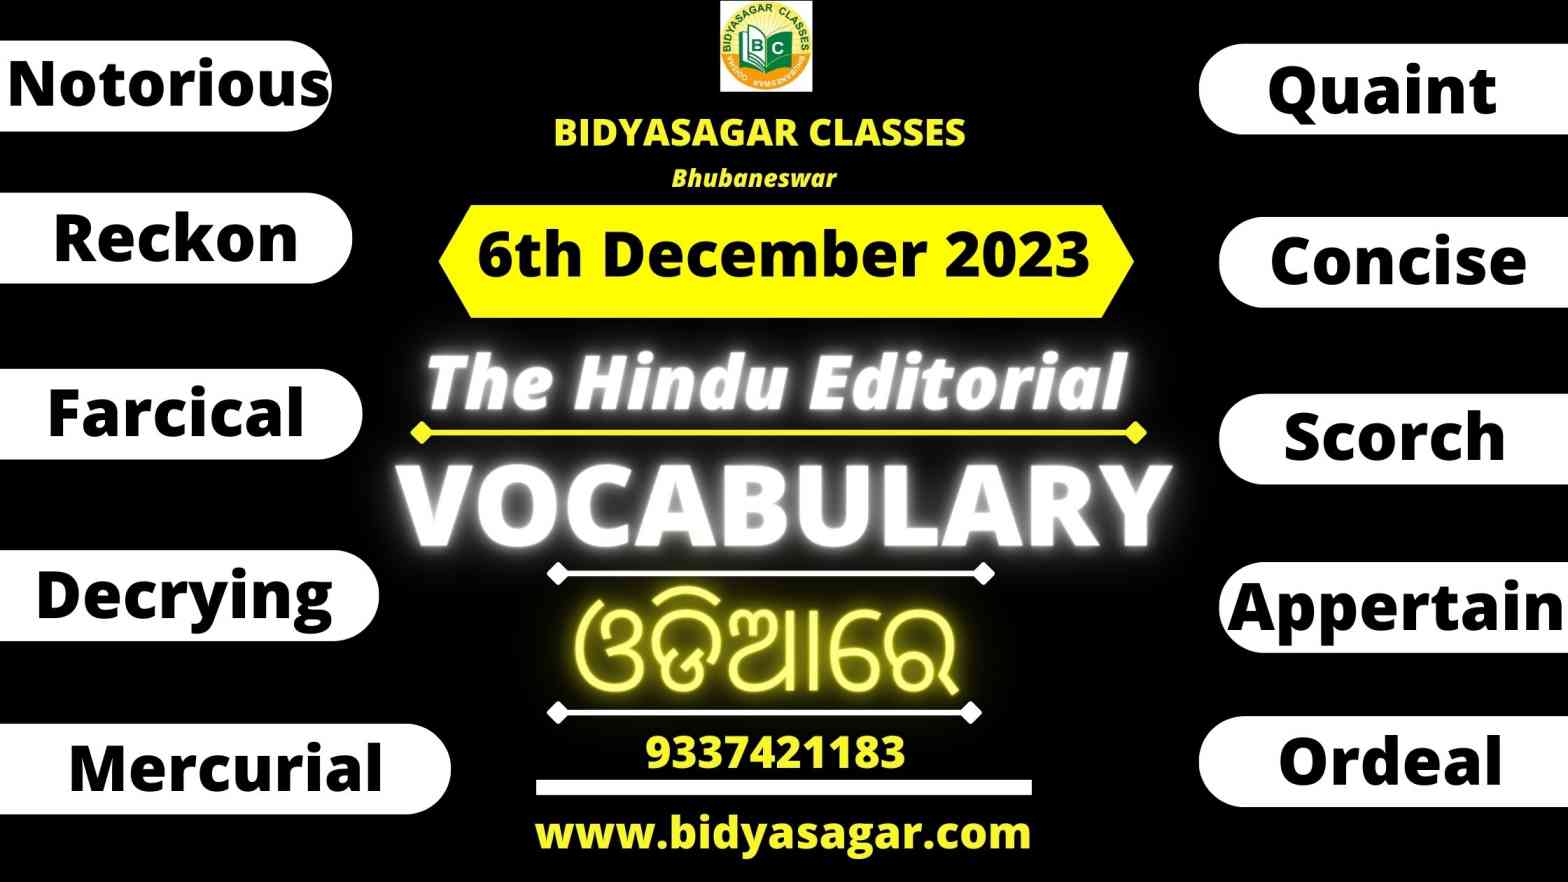 The Hindu Editorial Vocabulary of 6th December 2023